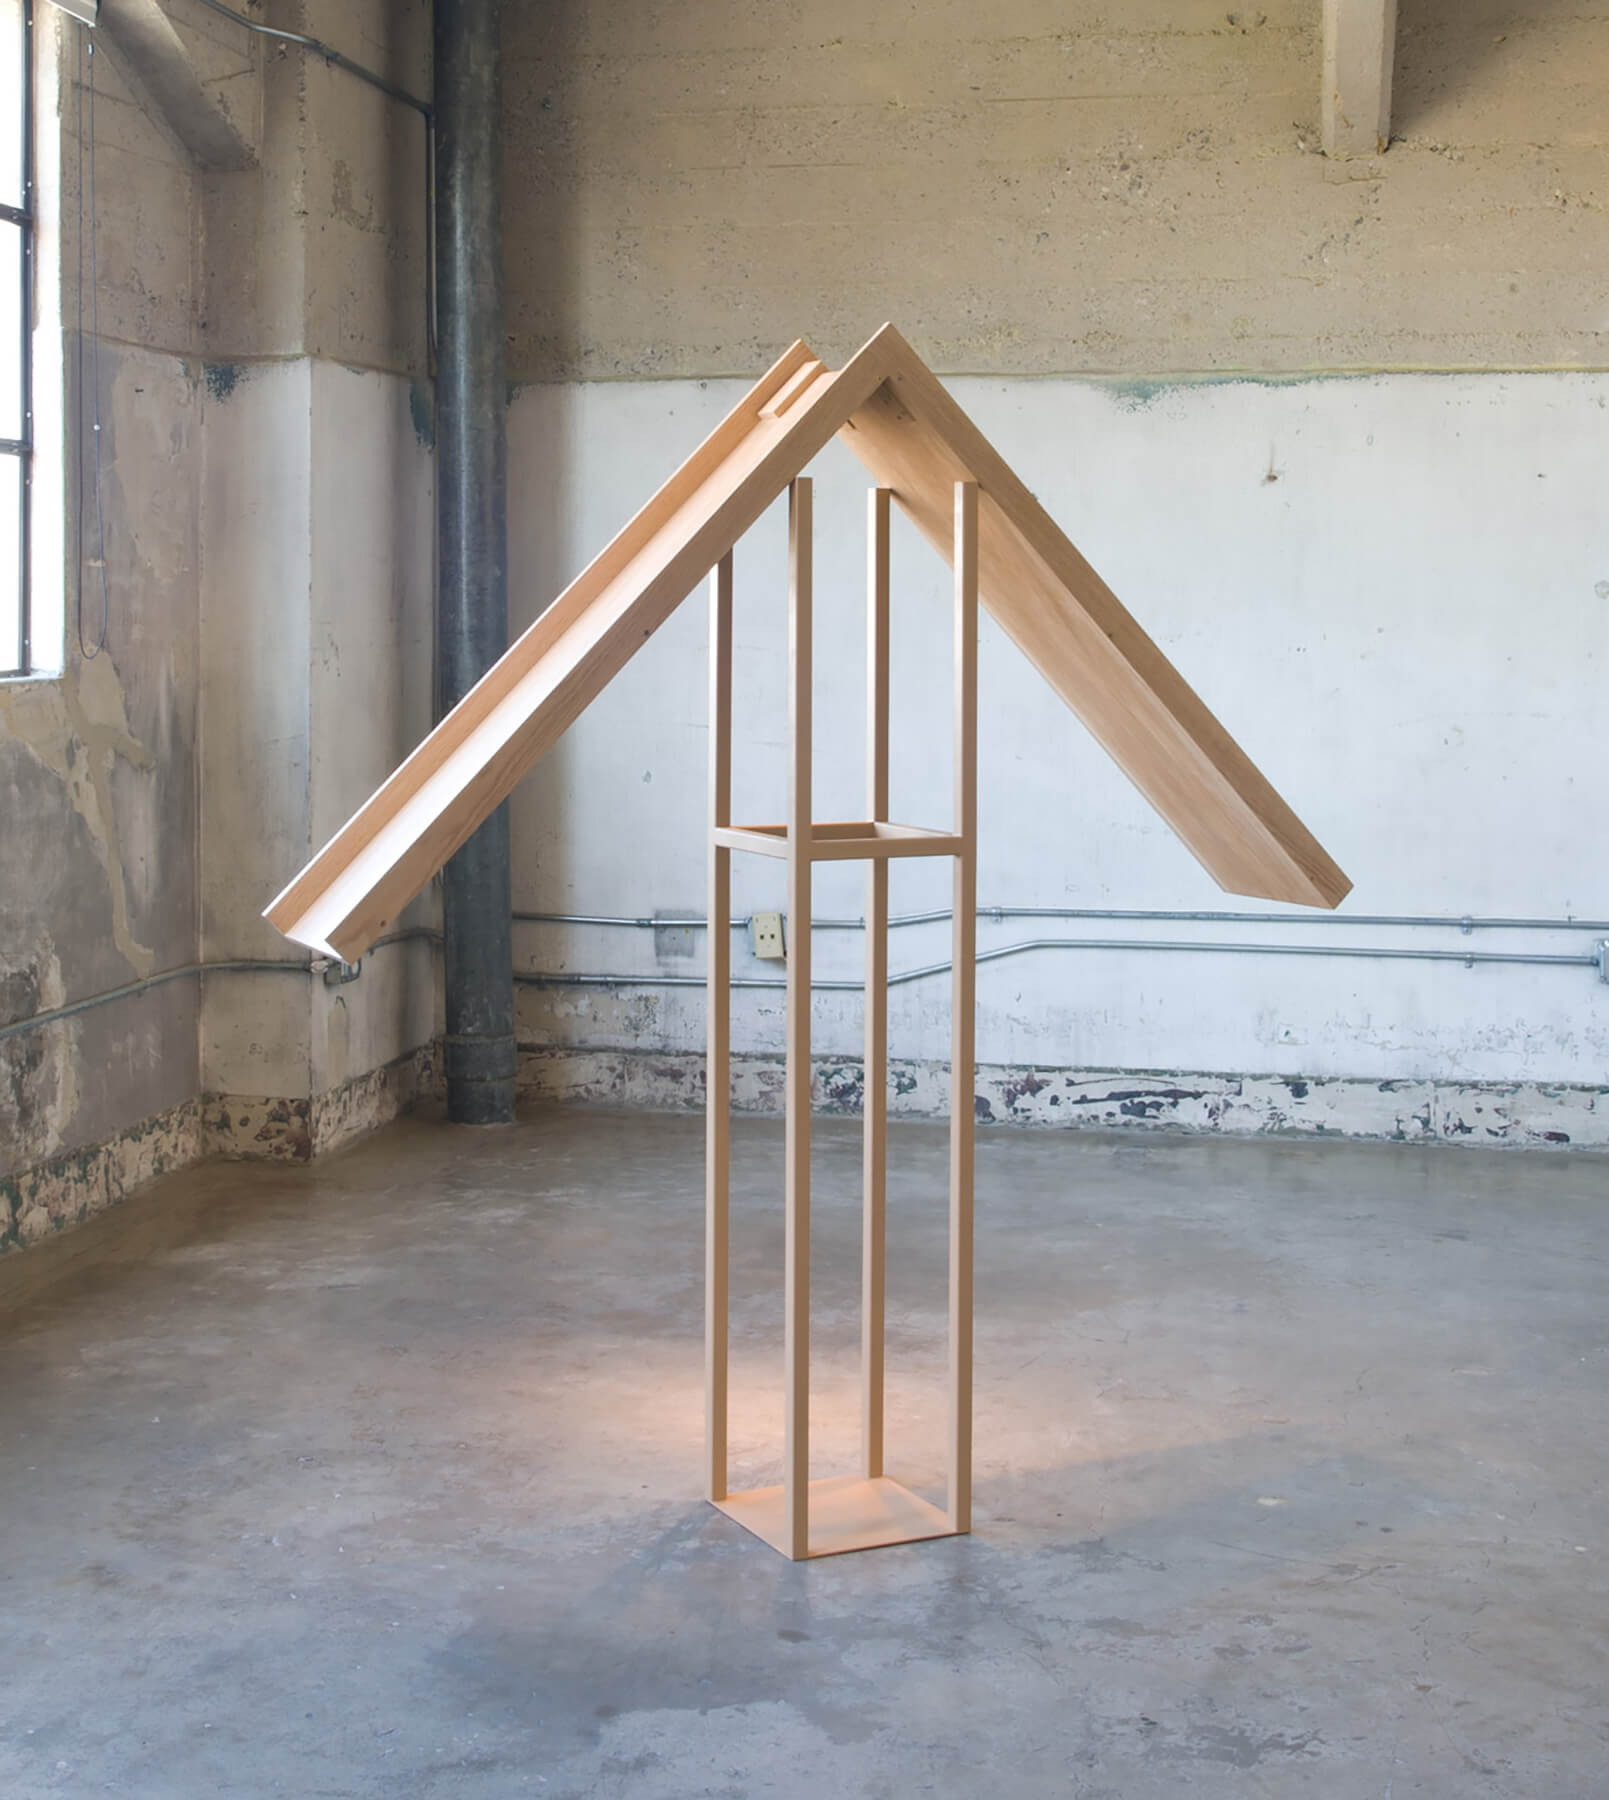 Make me a home, over there, 3 Positions, Upturned metal pedestal, wood angle that shifts position, Life size, 2013